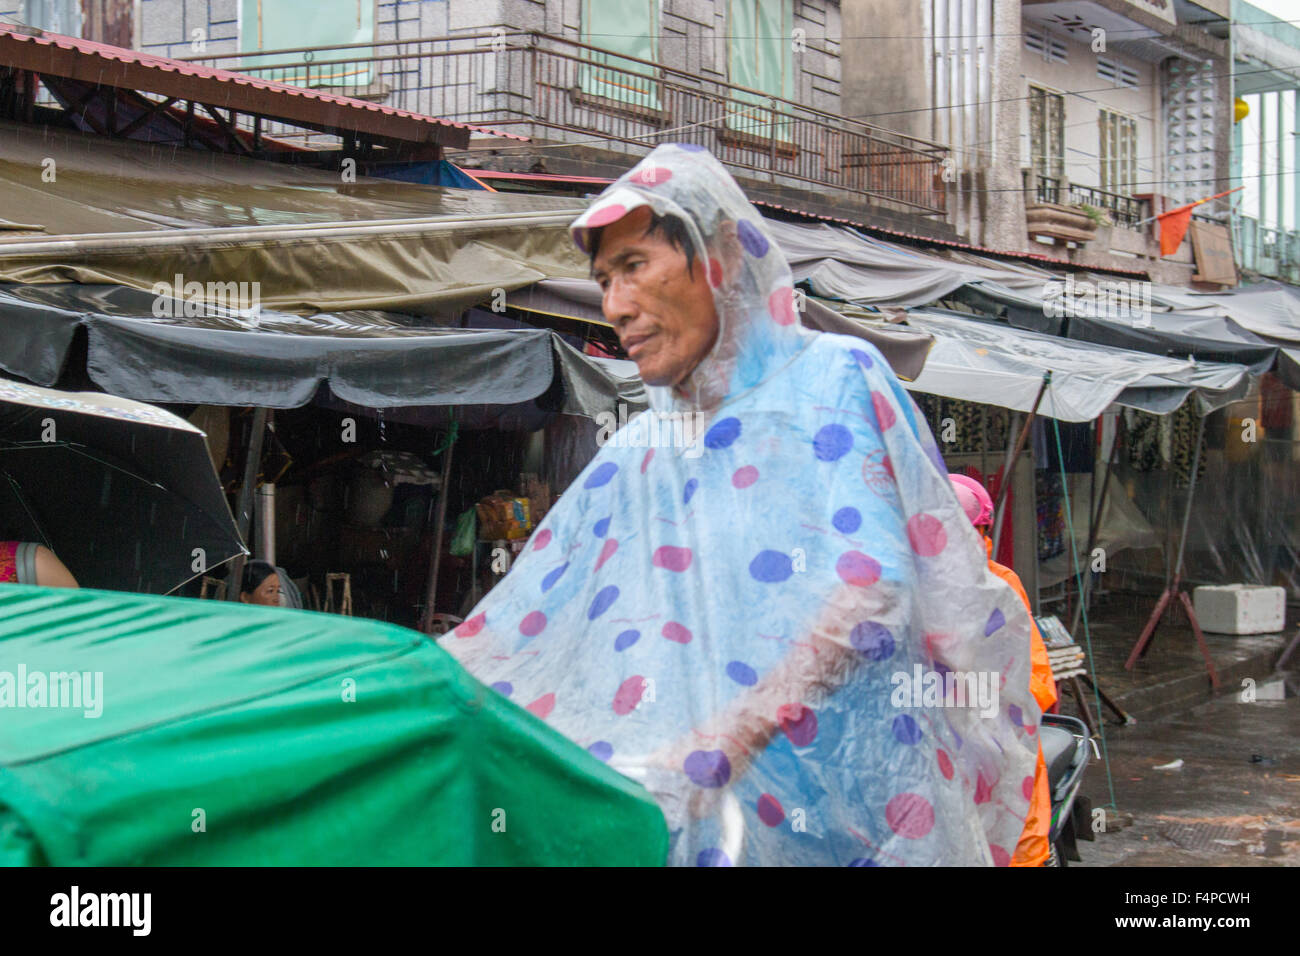 Hoi An ancient town Vietnam, cyclo rickshaw rider with waterproofs on to keep dry during rainstorm,Vietnam Stock Photo